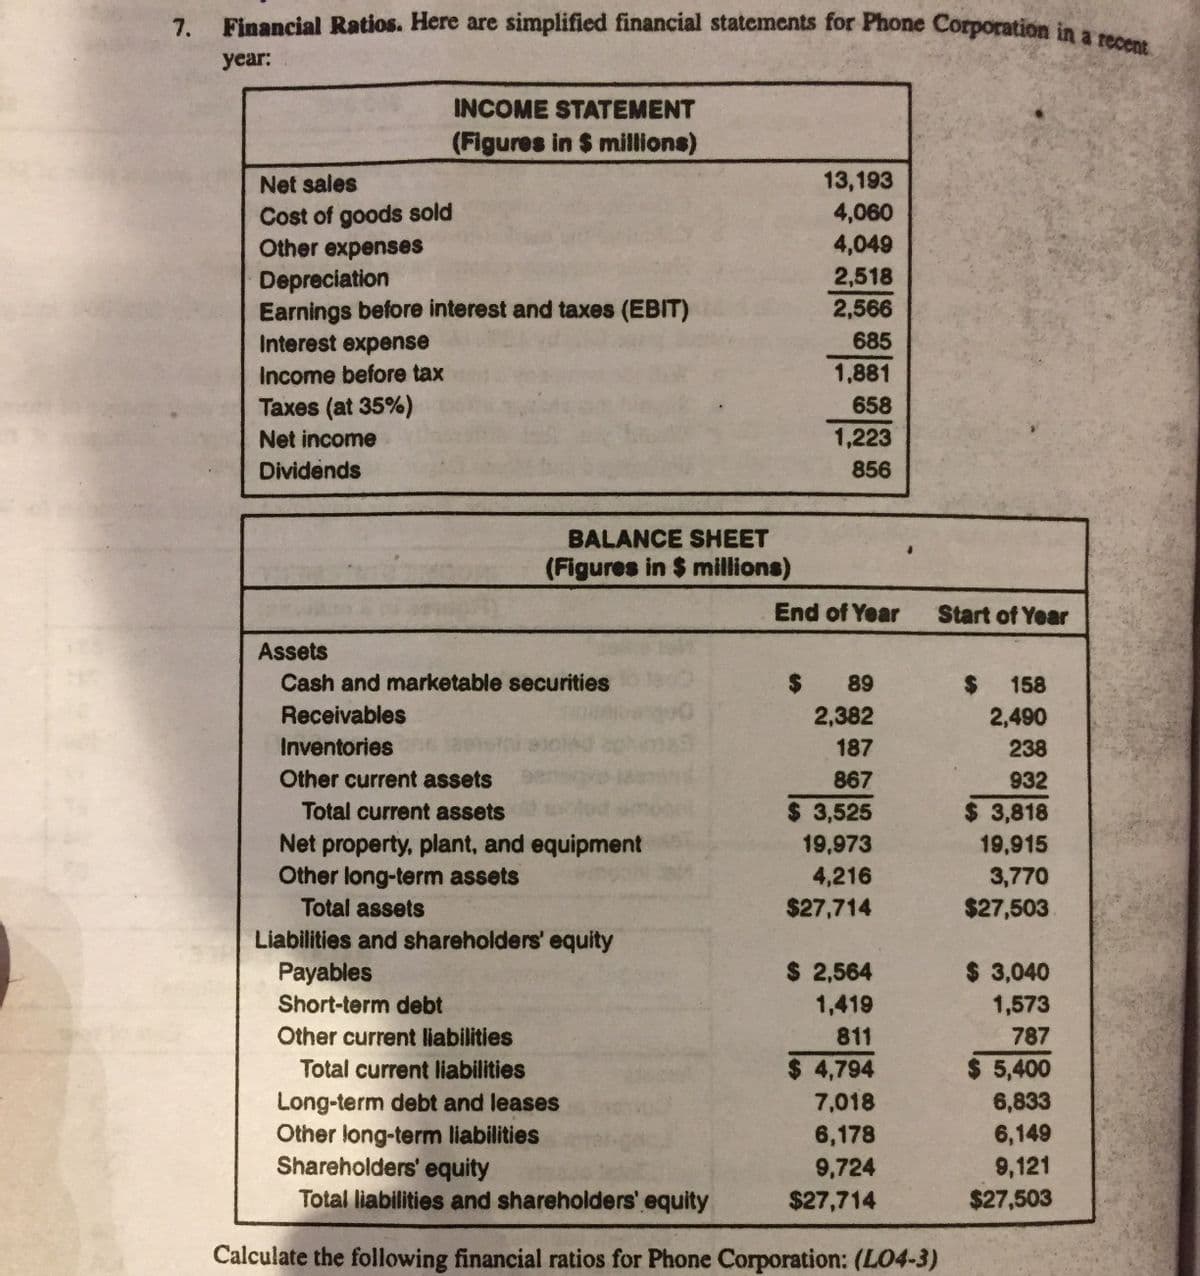 Financial Ratios. Here are simplified financial statements for Phone Corporation in a recent
7.
year:
INCOME STATEMENT
(Figures in $ millions)
13,193
4,060
Net sales
Cost of goods sold
Other expenses
Depreciation
Earnings before interest and taxes (EBIT)
Interest expense
4,049
2,518
2,566
685
Income before tax
1,881
Taxes (at 35%)
658
Net income
1,223
Dividends
856
BALANCE SHEET
(Figures in $ millions)
End of Year
Start of Year
Assets
Cash and marketable securities
$ 89
%24
158
Receivables
2,382
187
2,490
Inventories ne
238
Other current assets
867
932
$ 3,525
$ 3,818
19,915
Total current assets
Net property, plant, and equipment
Other long-term assets
19,973
4,216
$27,714
3,770
$27,503
Total assets
Liabilities and shareholders' equity
Payables
Short-term debt
$ 2,564
$ 3,040
1,573
1,419
Other current liabilities
811
787
Total current liabilities
$ 4,794
$ 5,400
Long-term debt and leases
Other long-term liabilities
Shareholders' equity
Total liabilities and shareholders' equity
7,018
6,833
6,149
9,121
$27,503
6,178
9,724
$27,714
Calculate the following financial ratios for Phone Corporation: (LO4-3)
